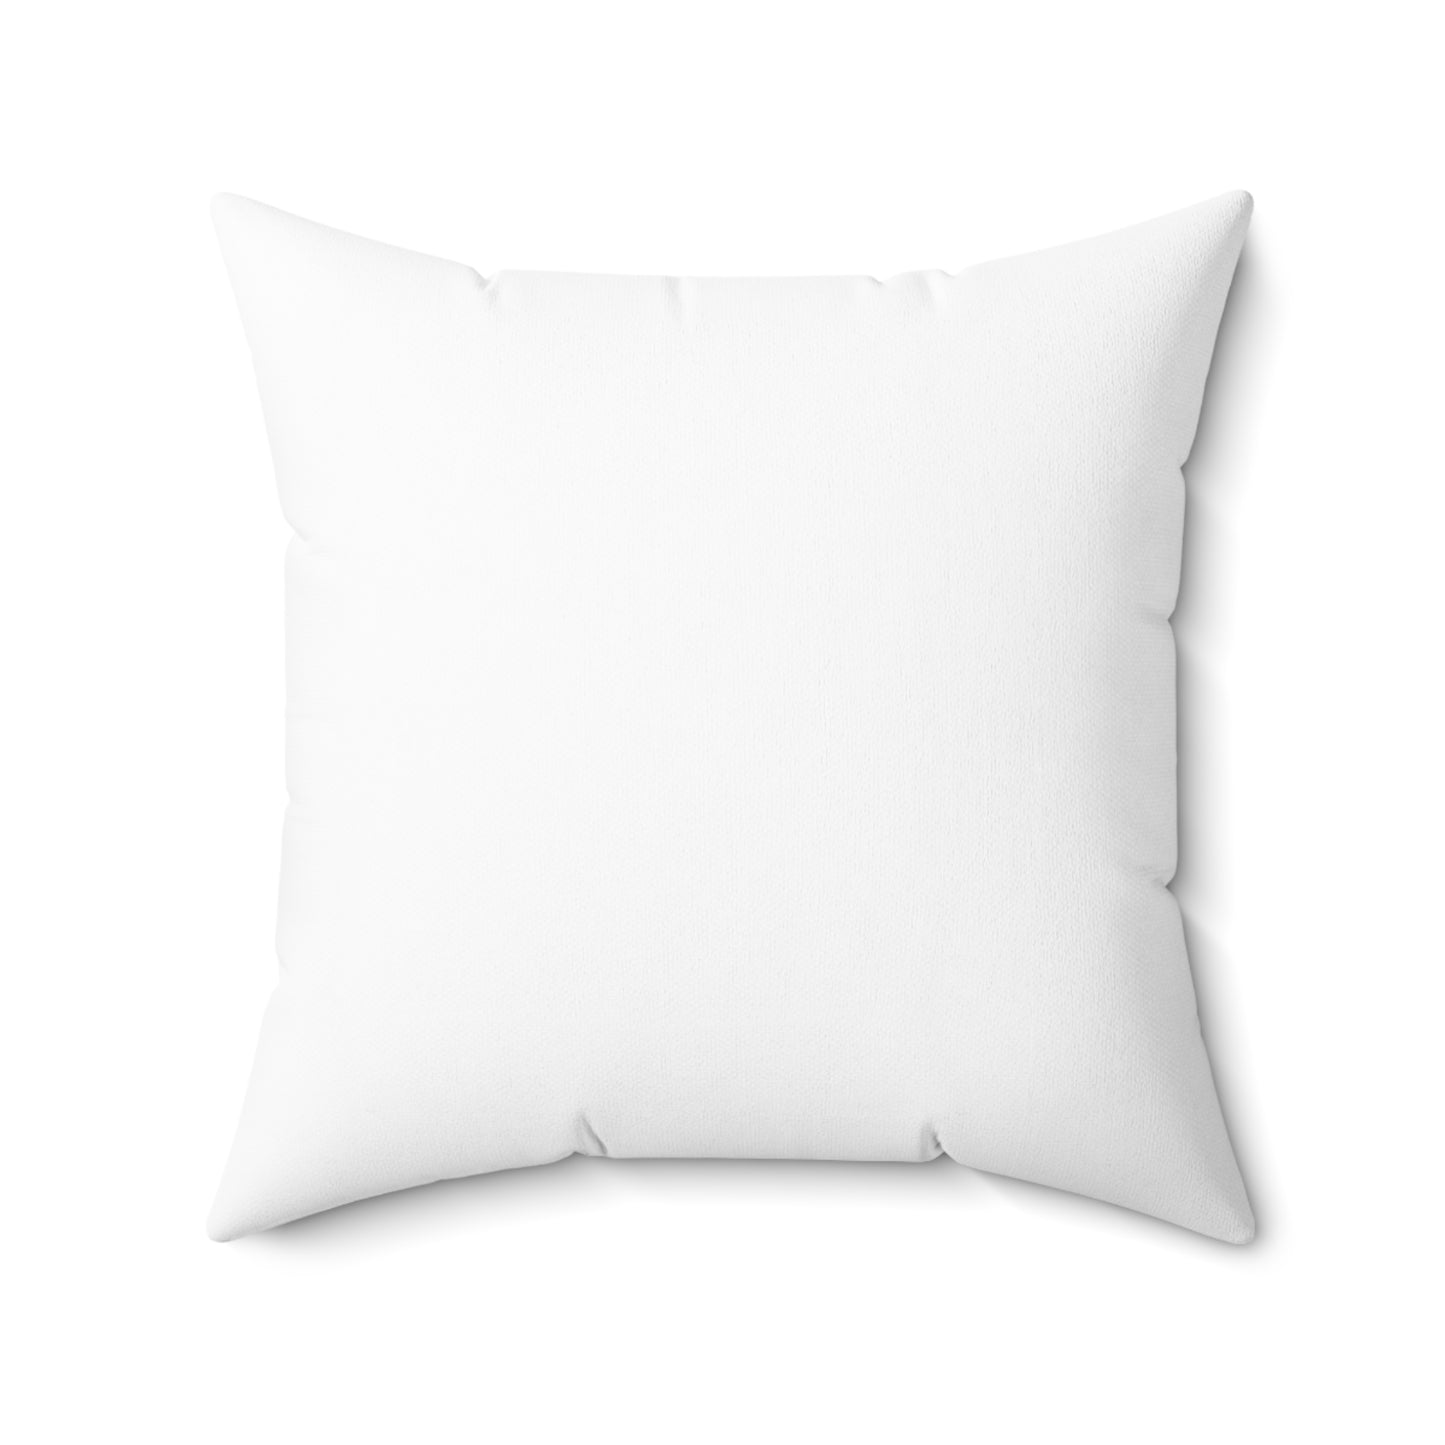 Square Pillow Polyptych Print